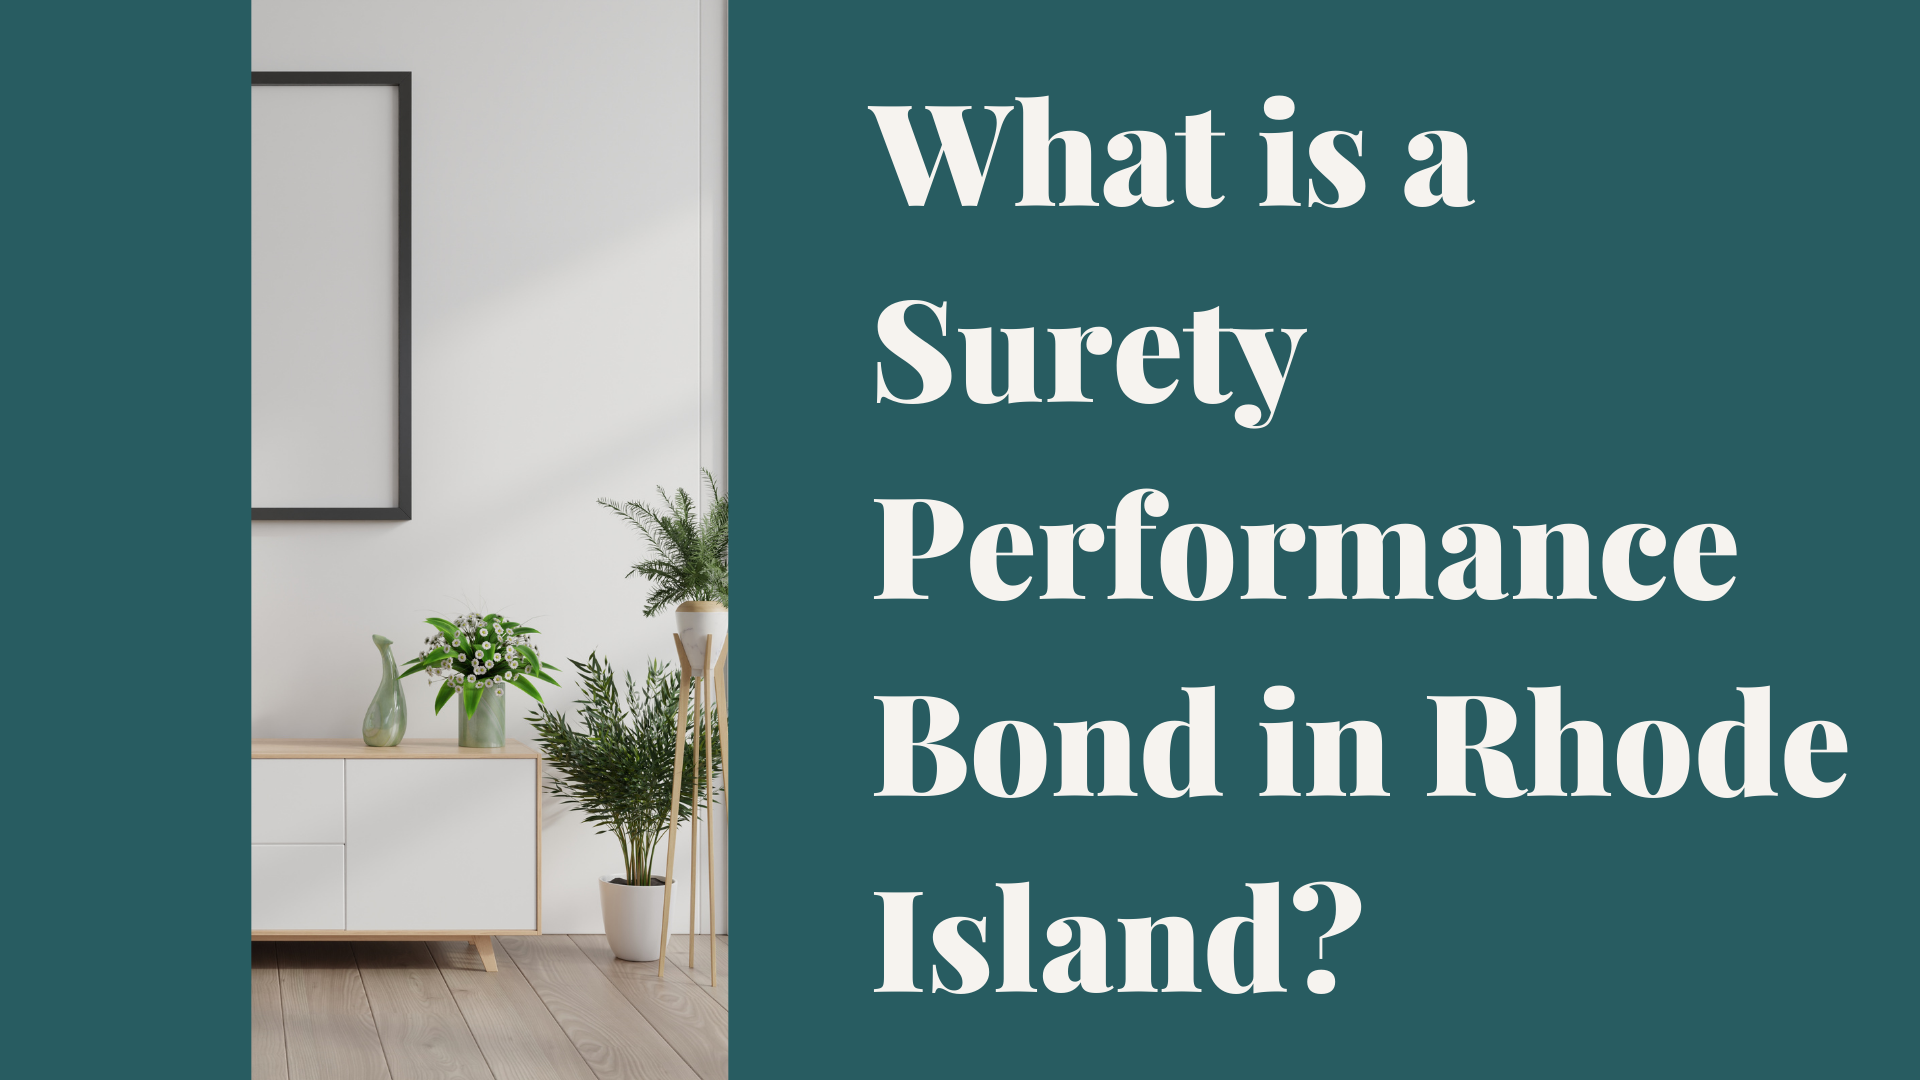 performance bond - Just how much is a Surety Performance Bond in Rhode Island